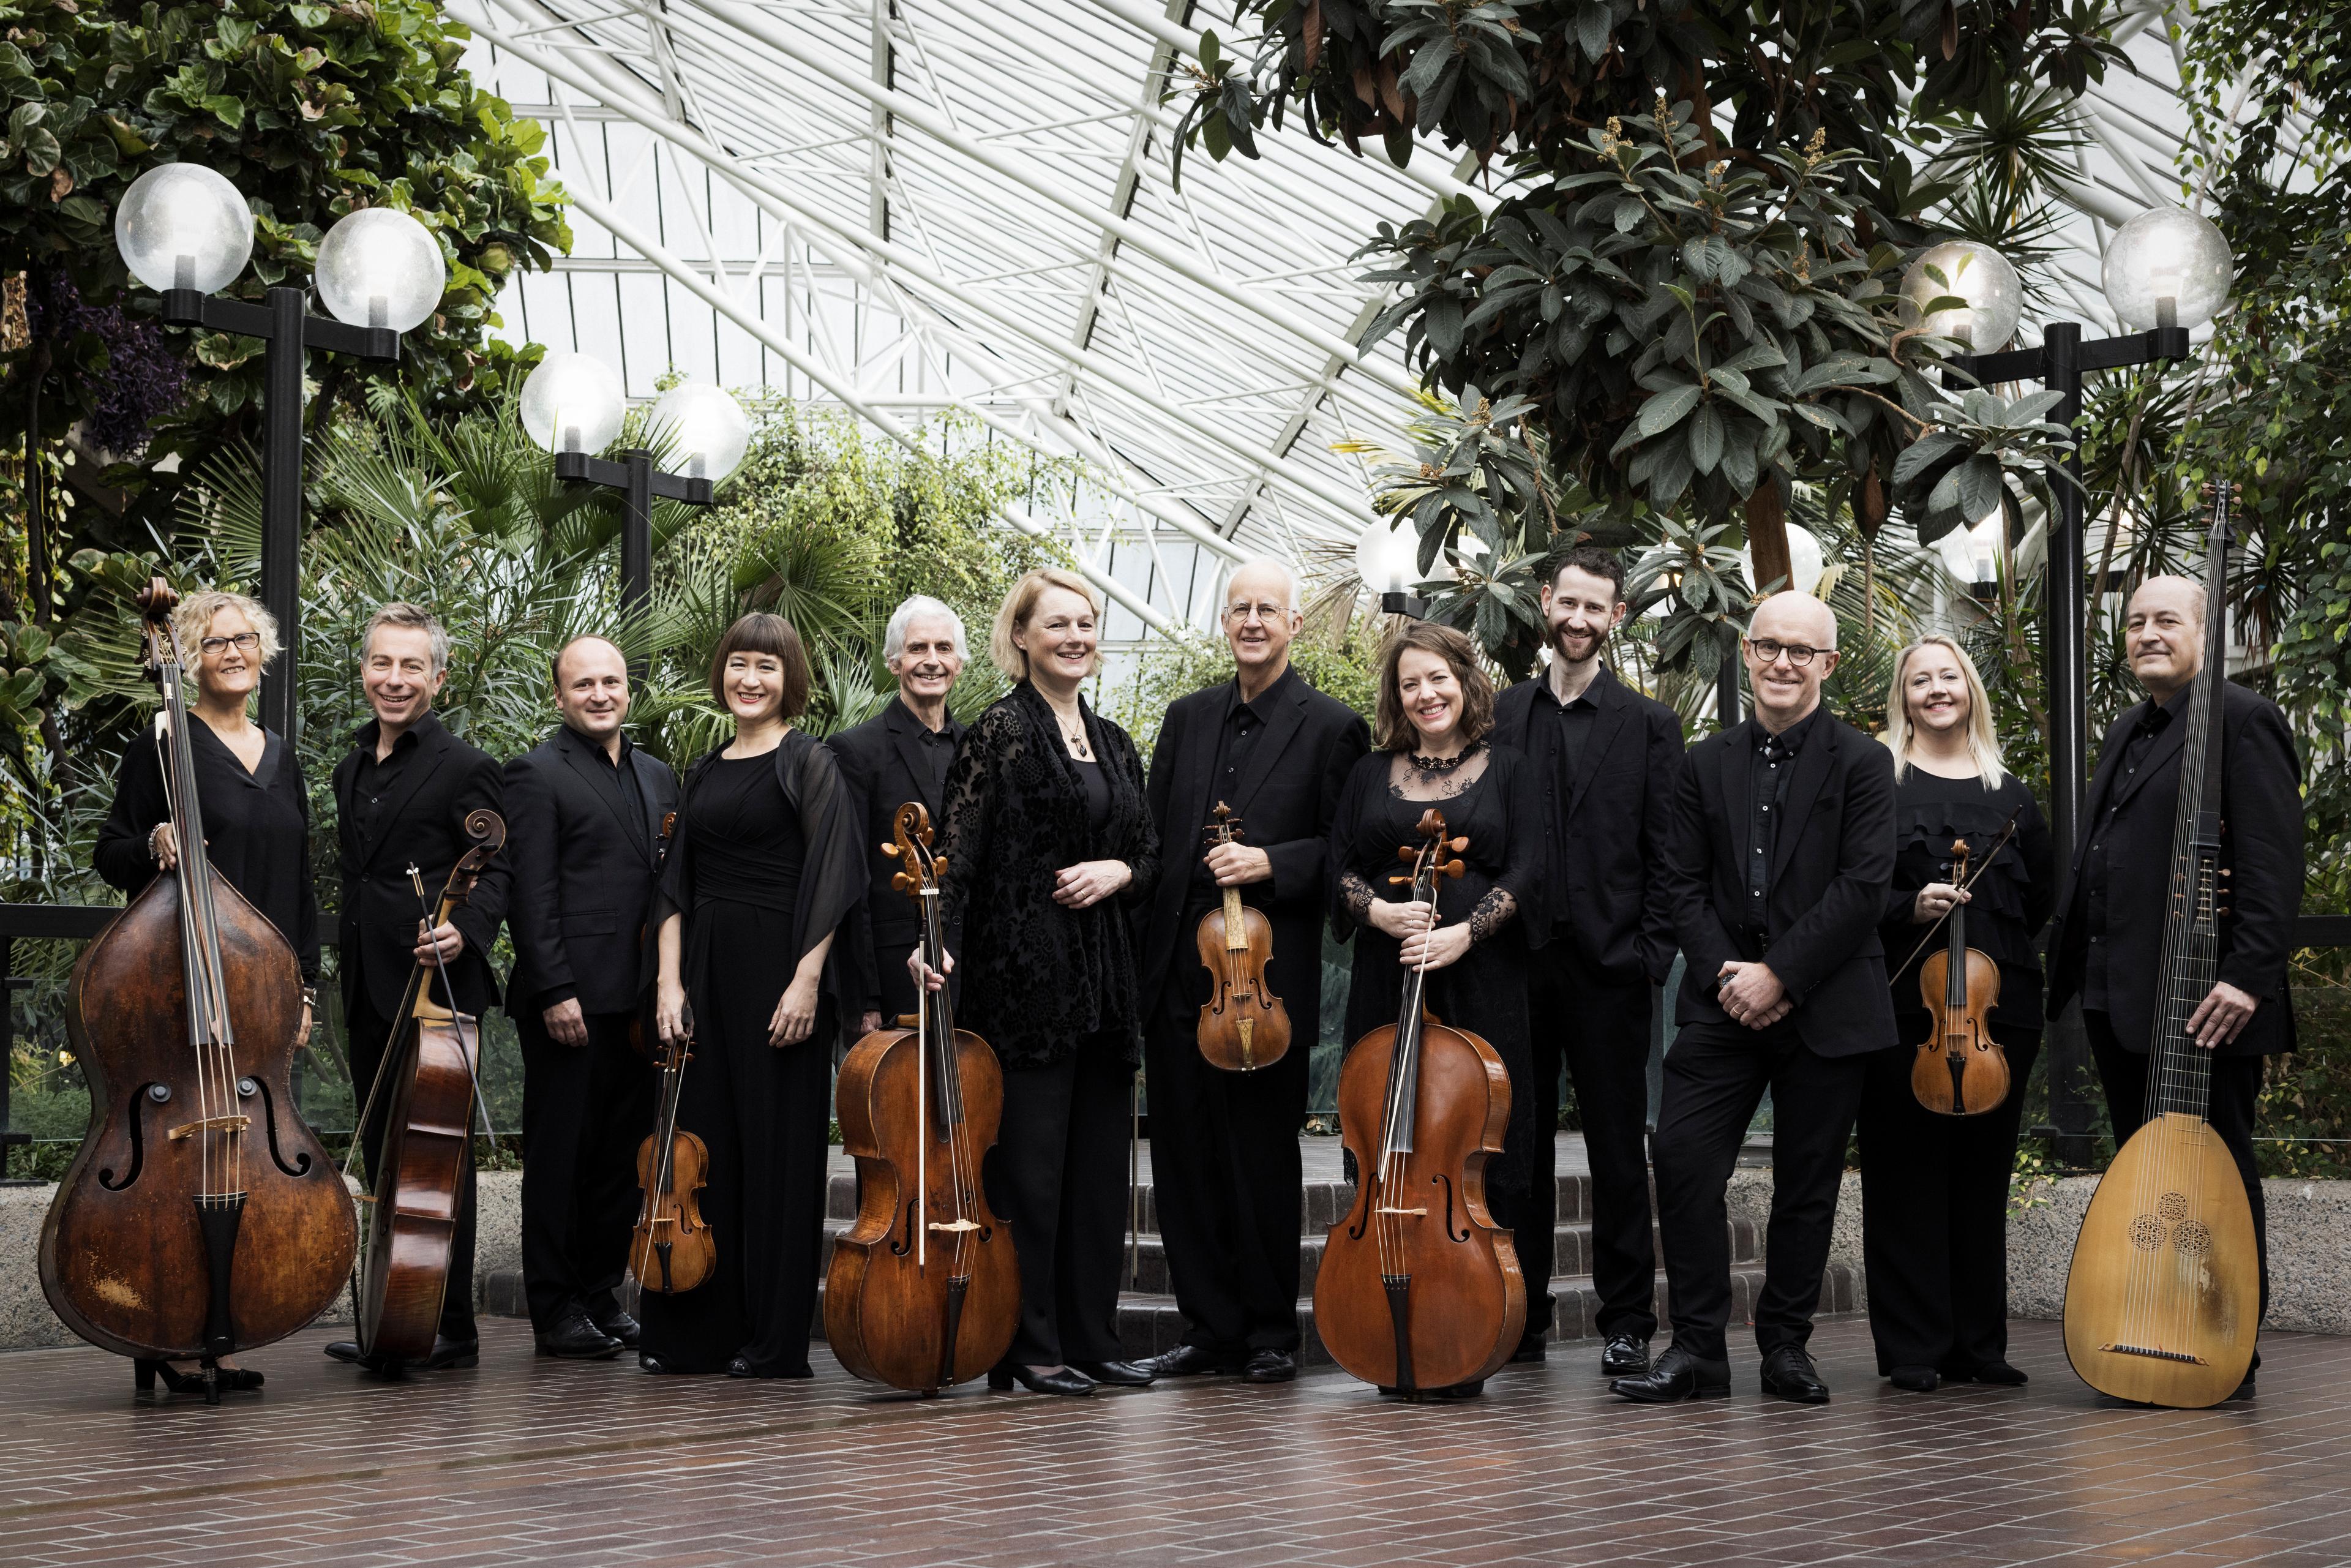 The Academy of Ancient Music standing with their instruments in a greenhouse smiling at the camera with foliage behind them